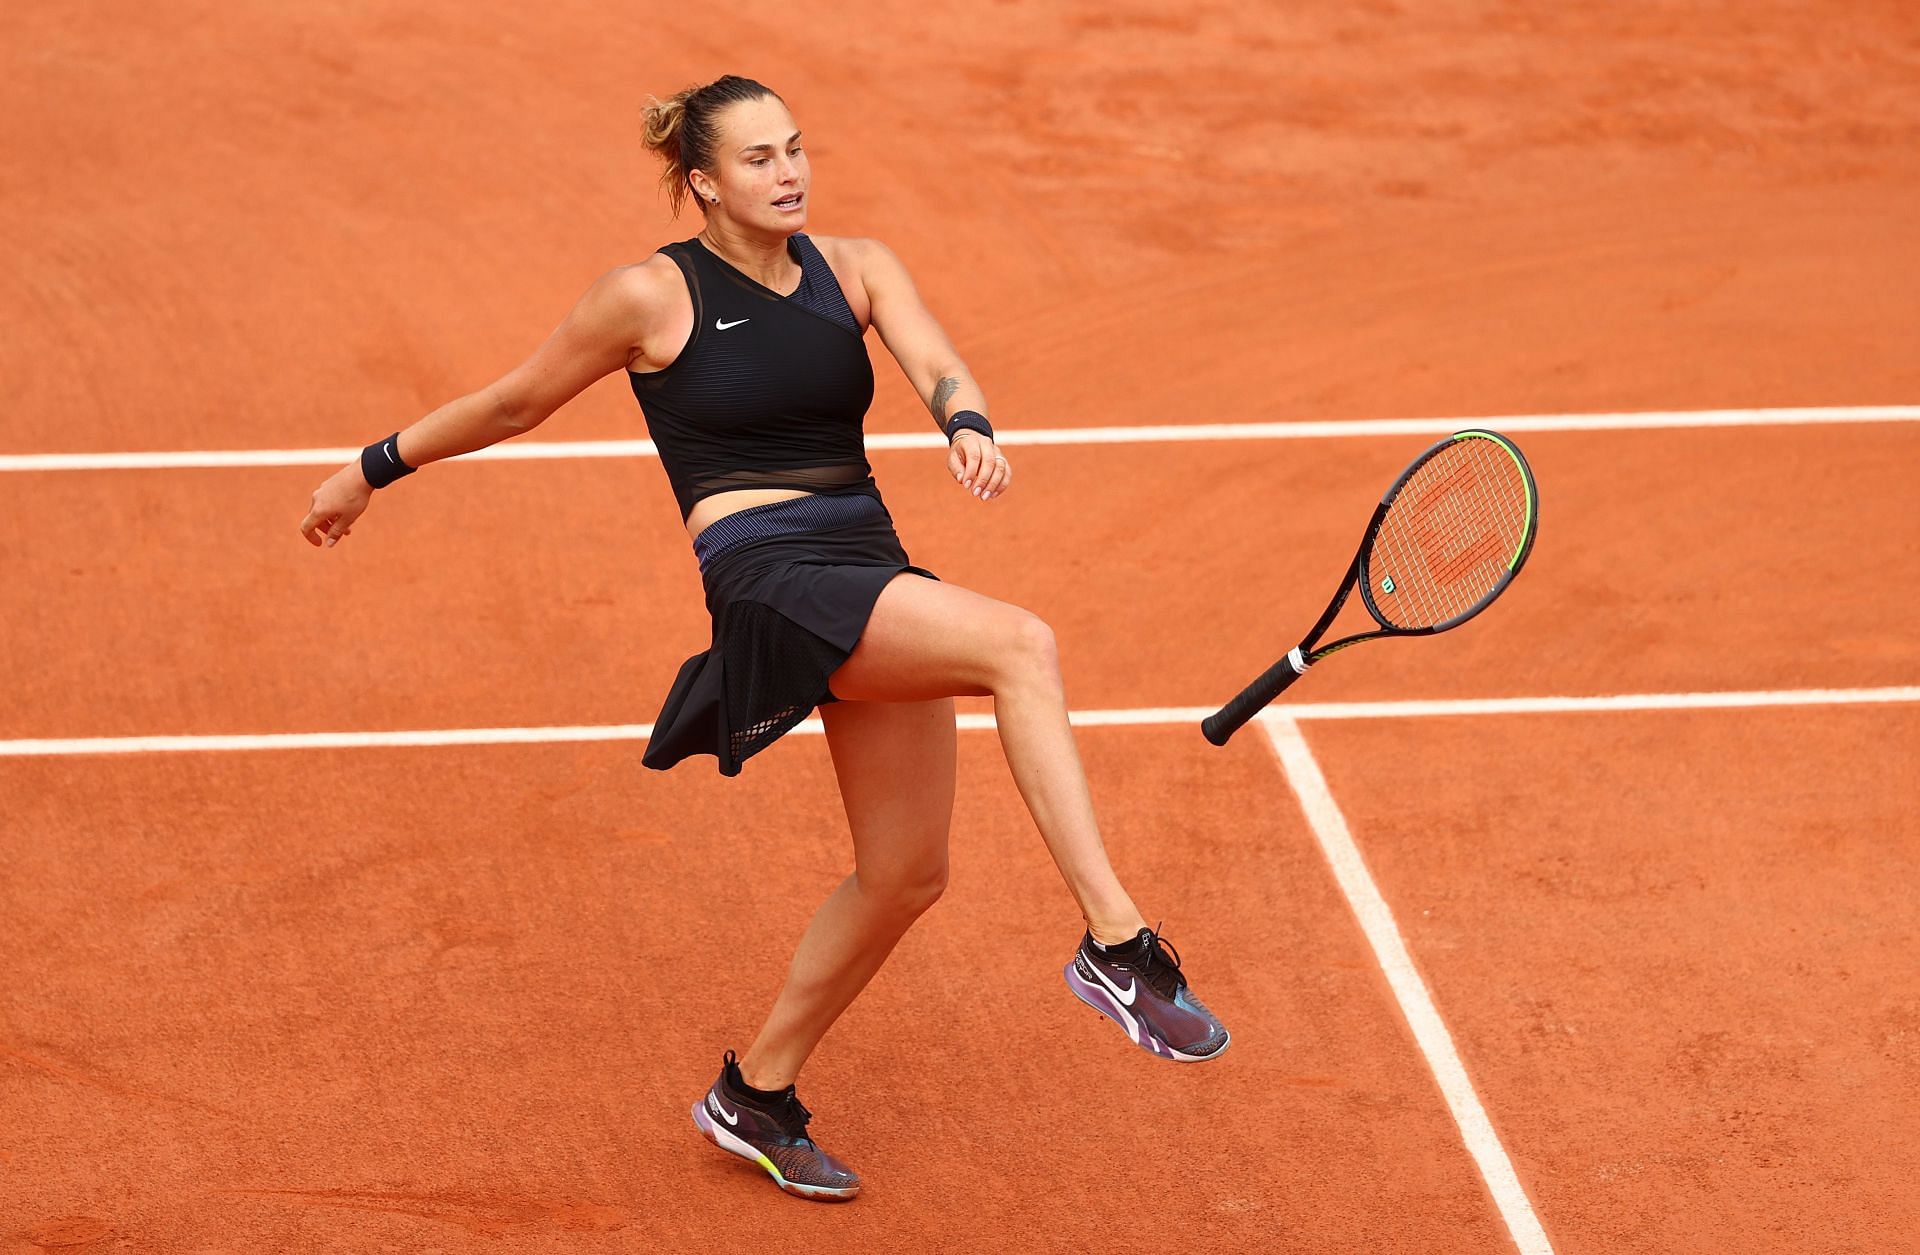 Sabalenka has won at least one WTA 1000 title for four consecutive years.